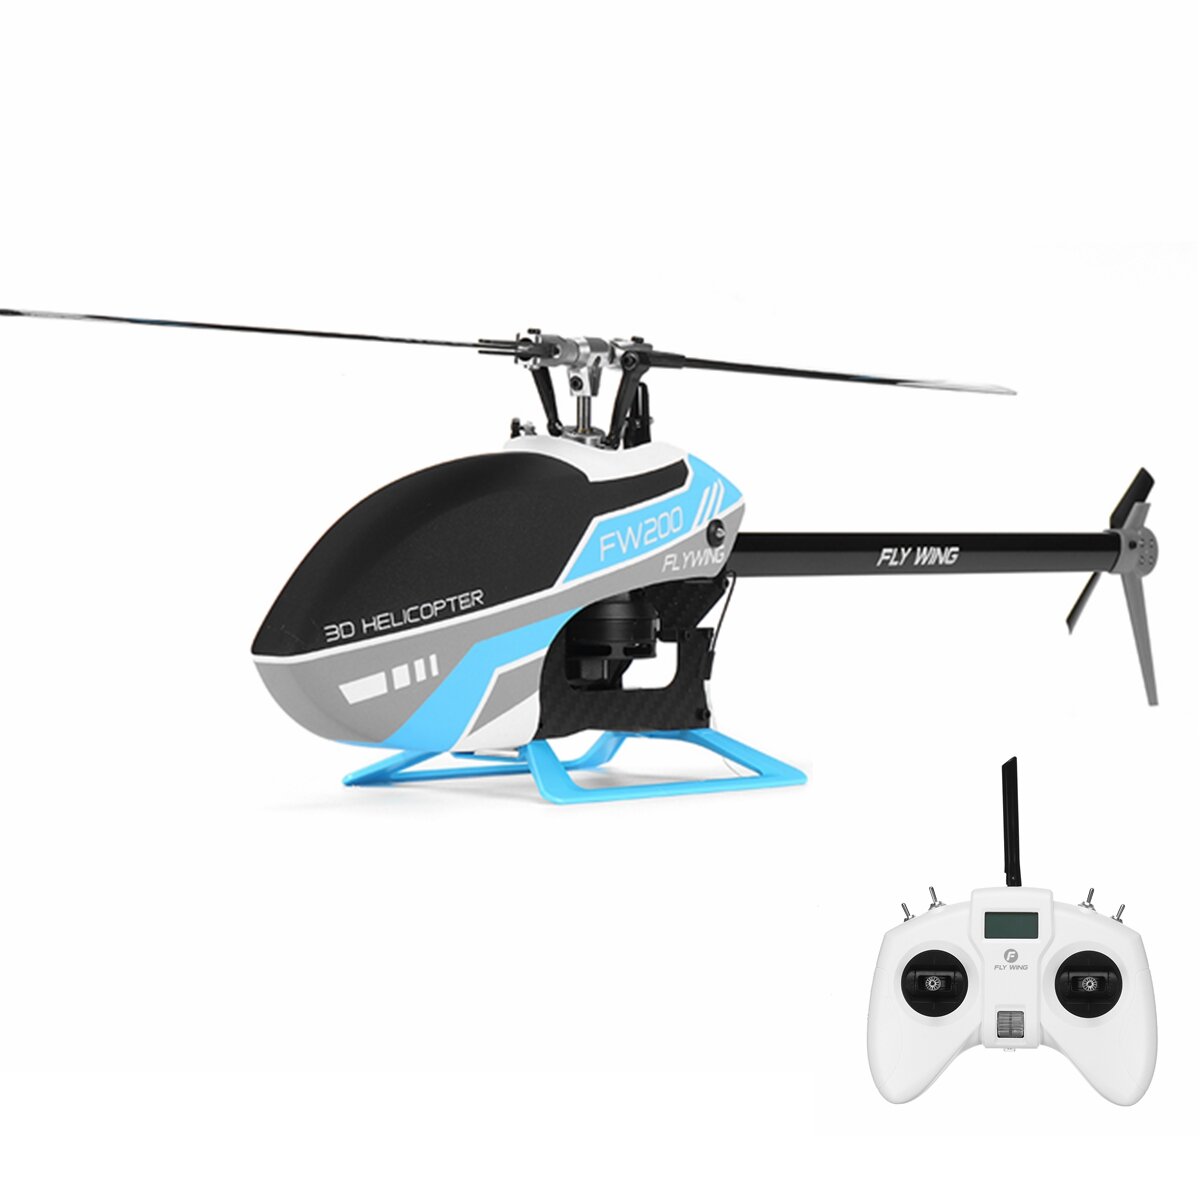 FLY WING FW200 6CH 3D Acrobatics GPS Altitude Hold One-key Return APP Aanpassen RC Helicopter RTF Me